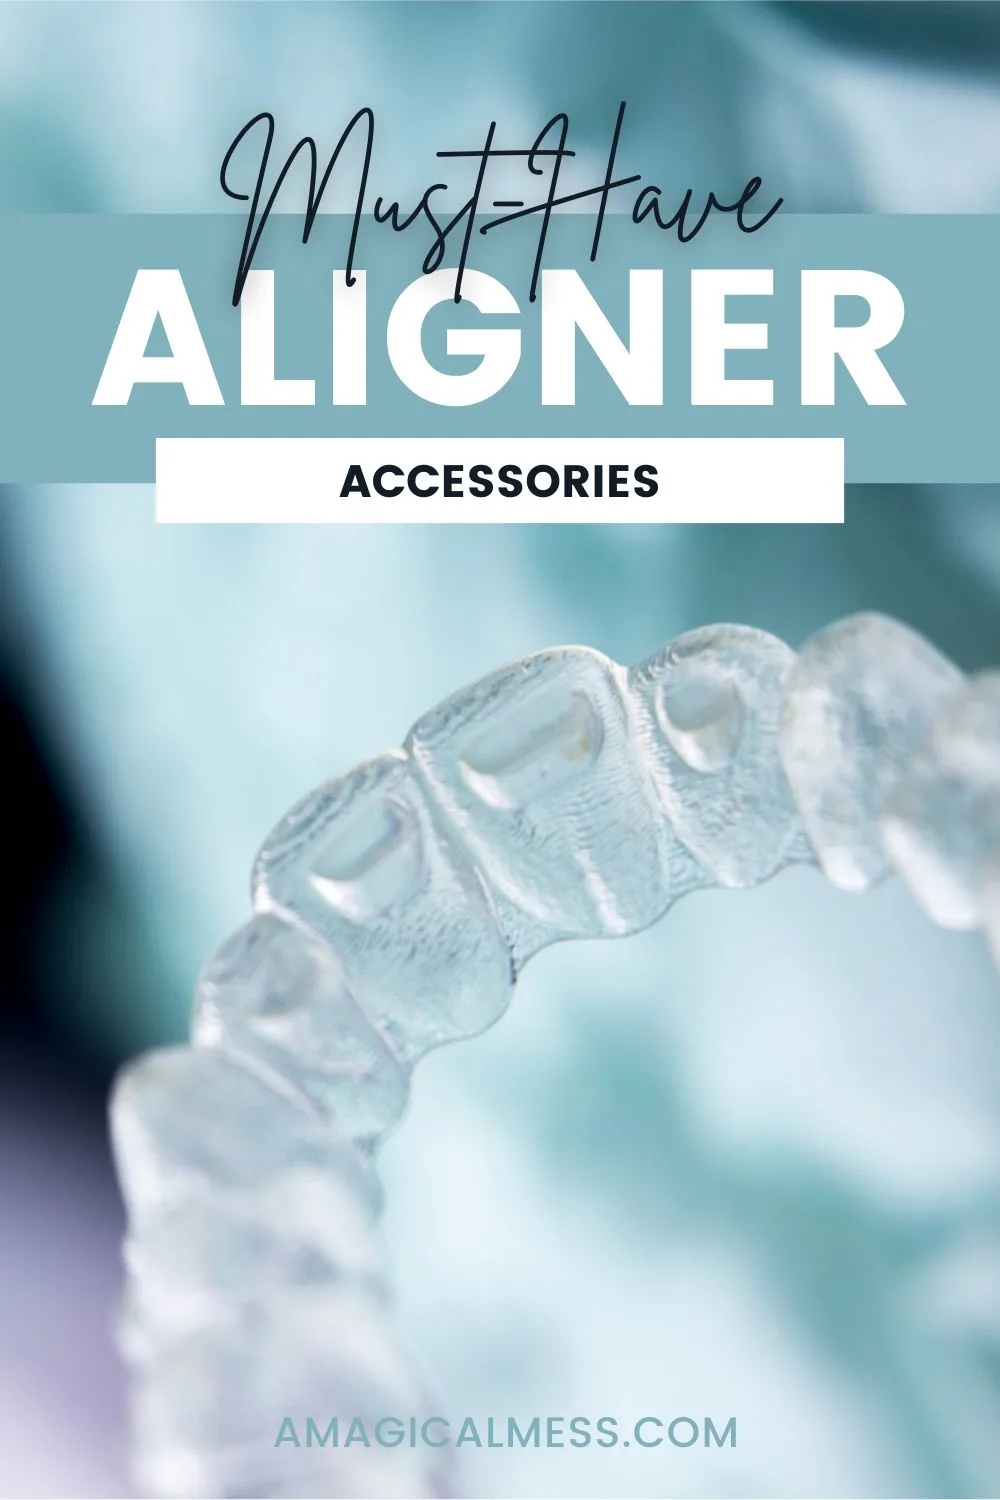 Clear aligners with a blue background.